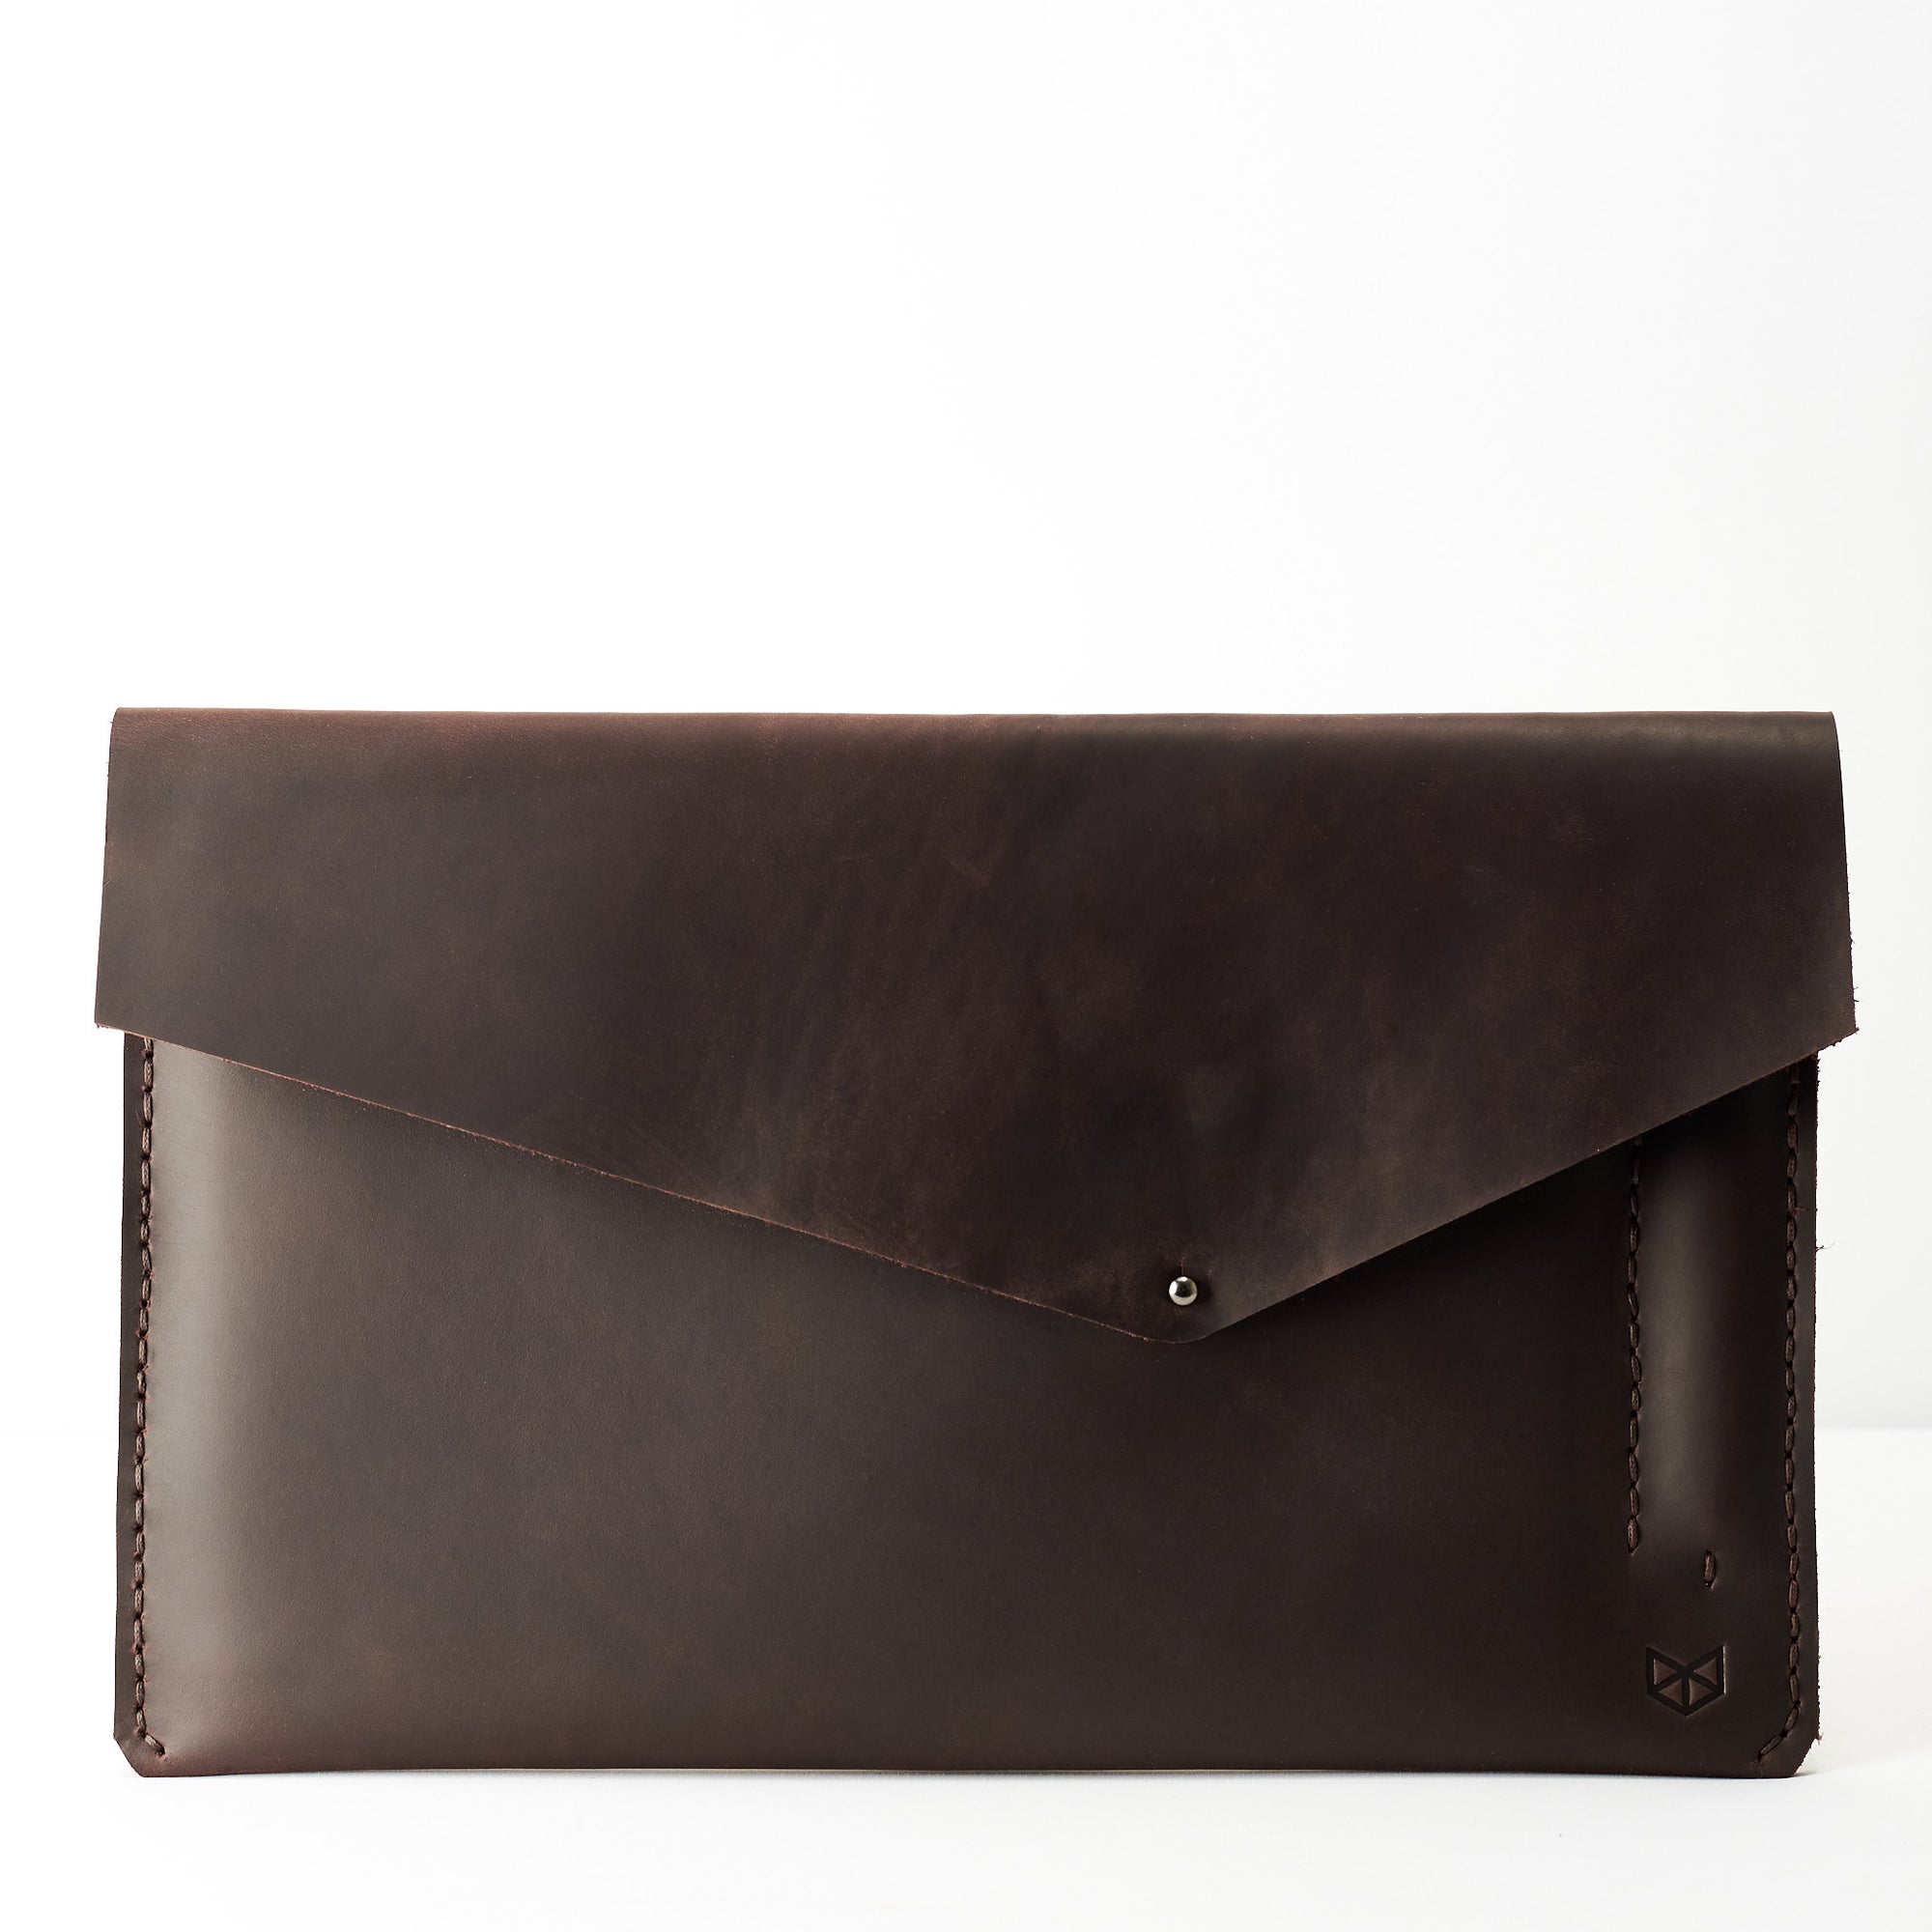 Dark brown leather sleeve for ASUS Zenbook Pro Duo. Mens gifts